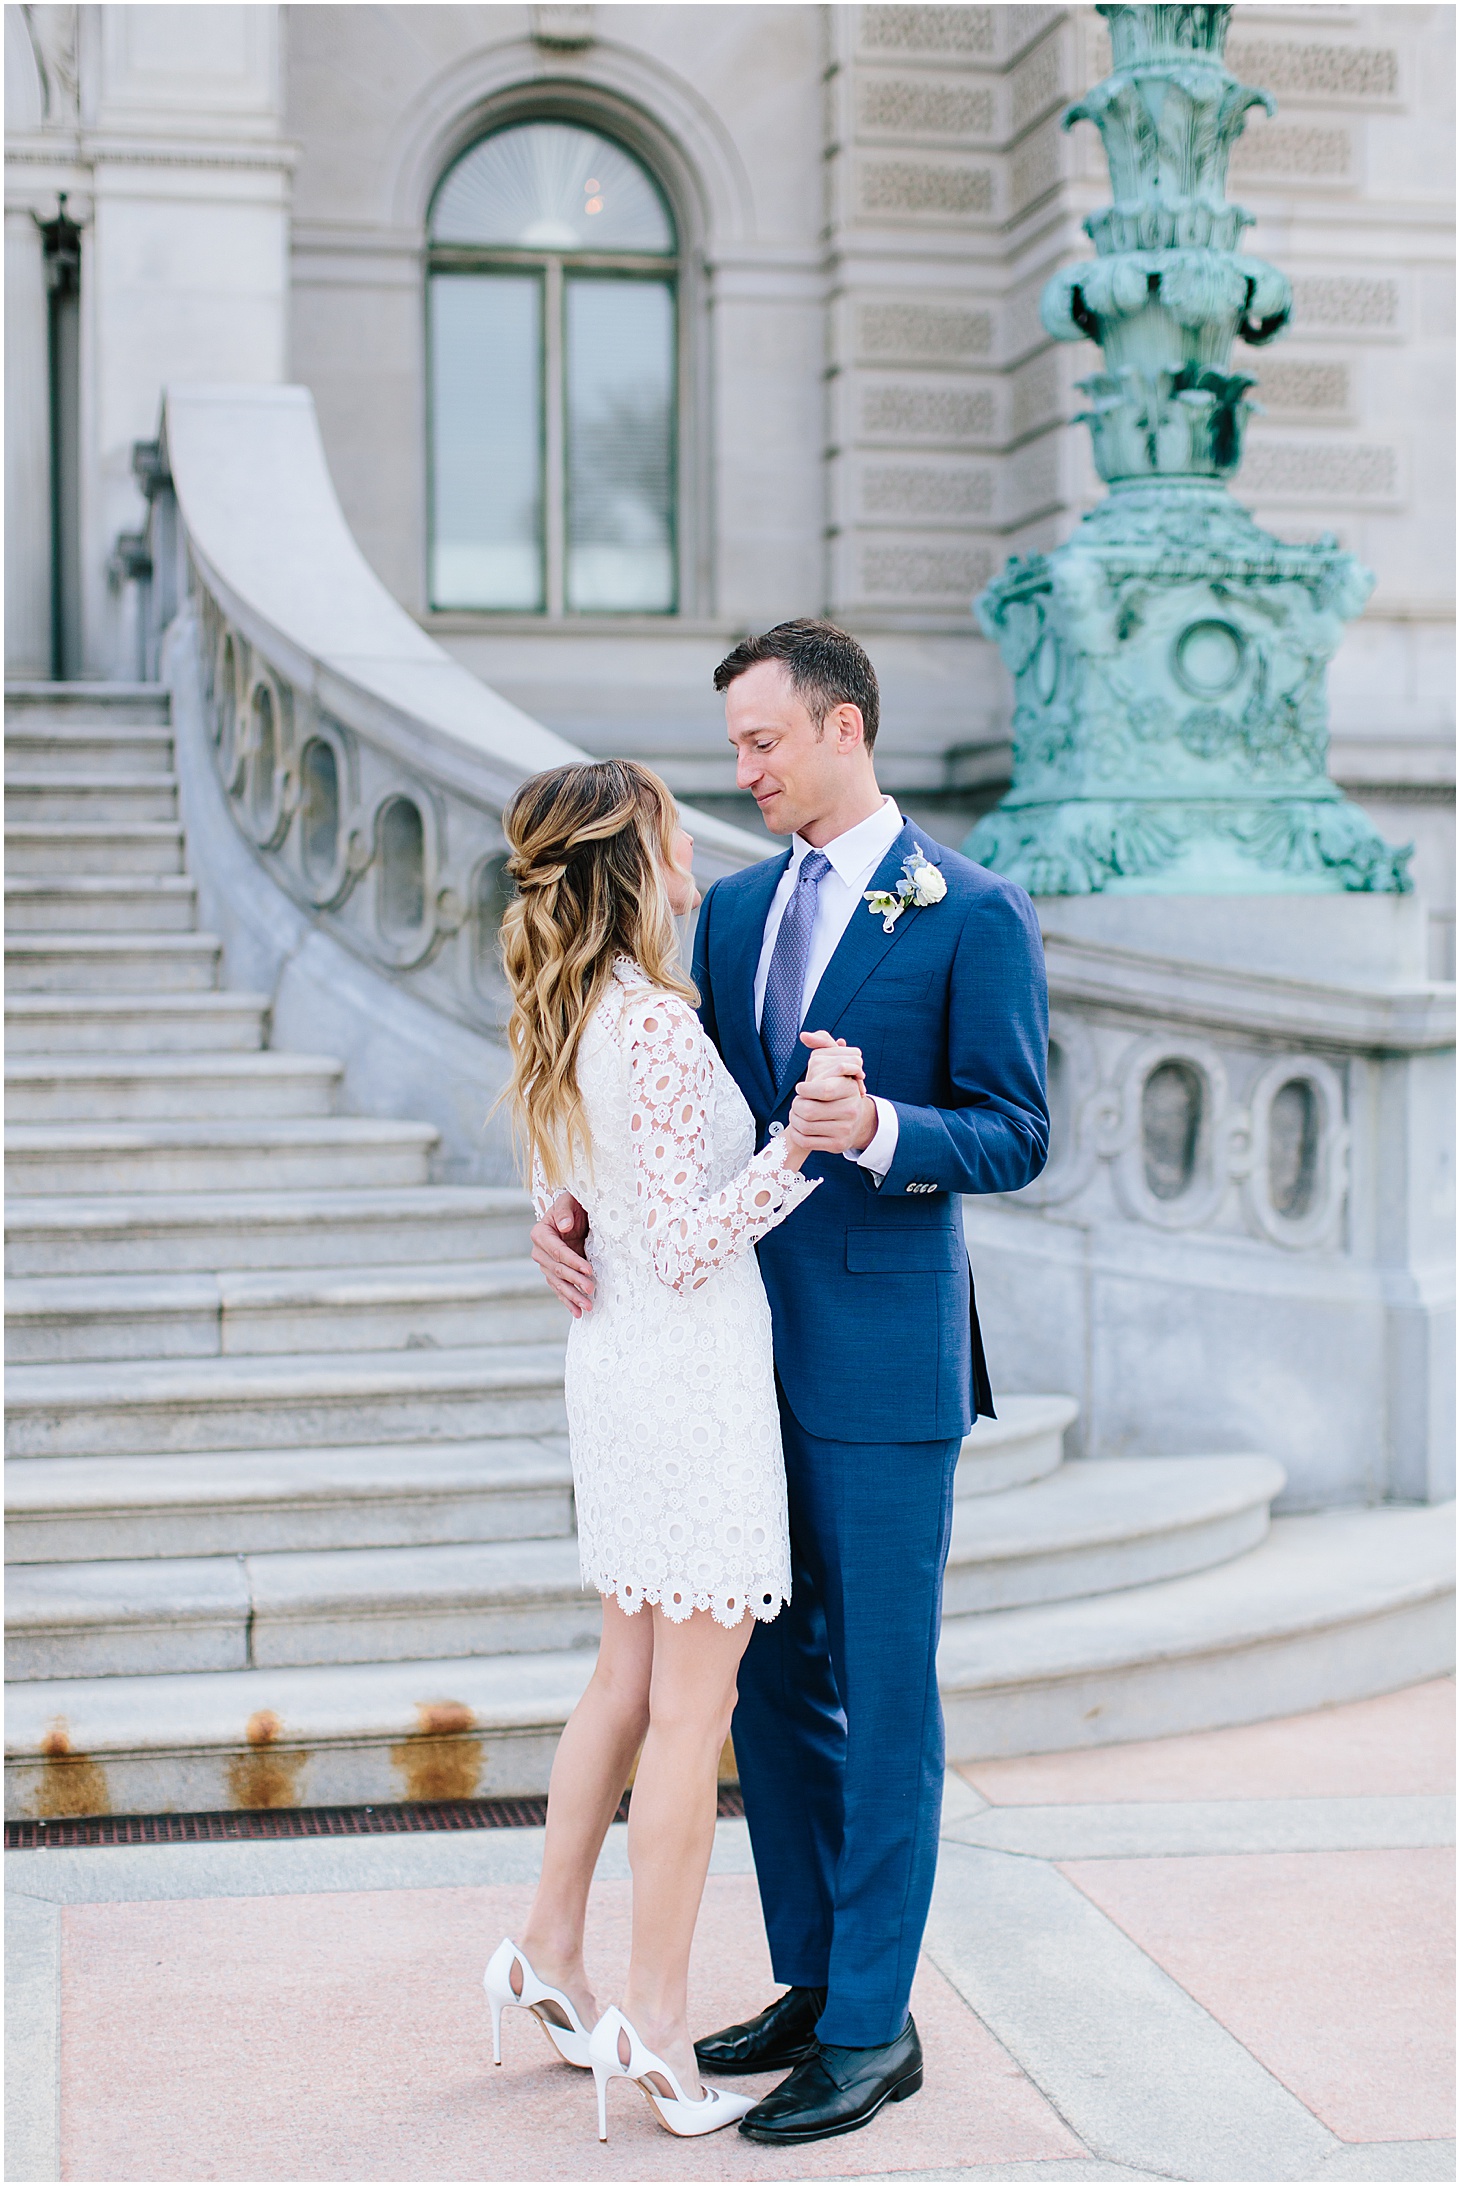 Wedding Portraits at Moultrie Courthouse, Cherry Blossom Elopement in Washington DC, Sarah Bradshaw Photography